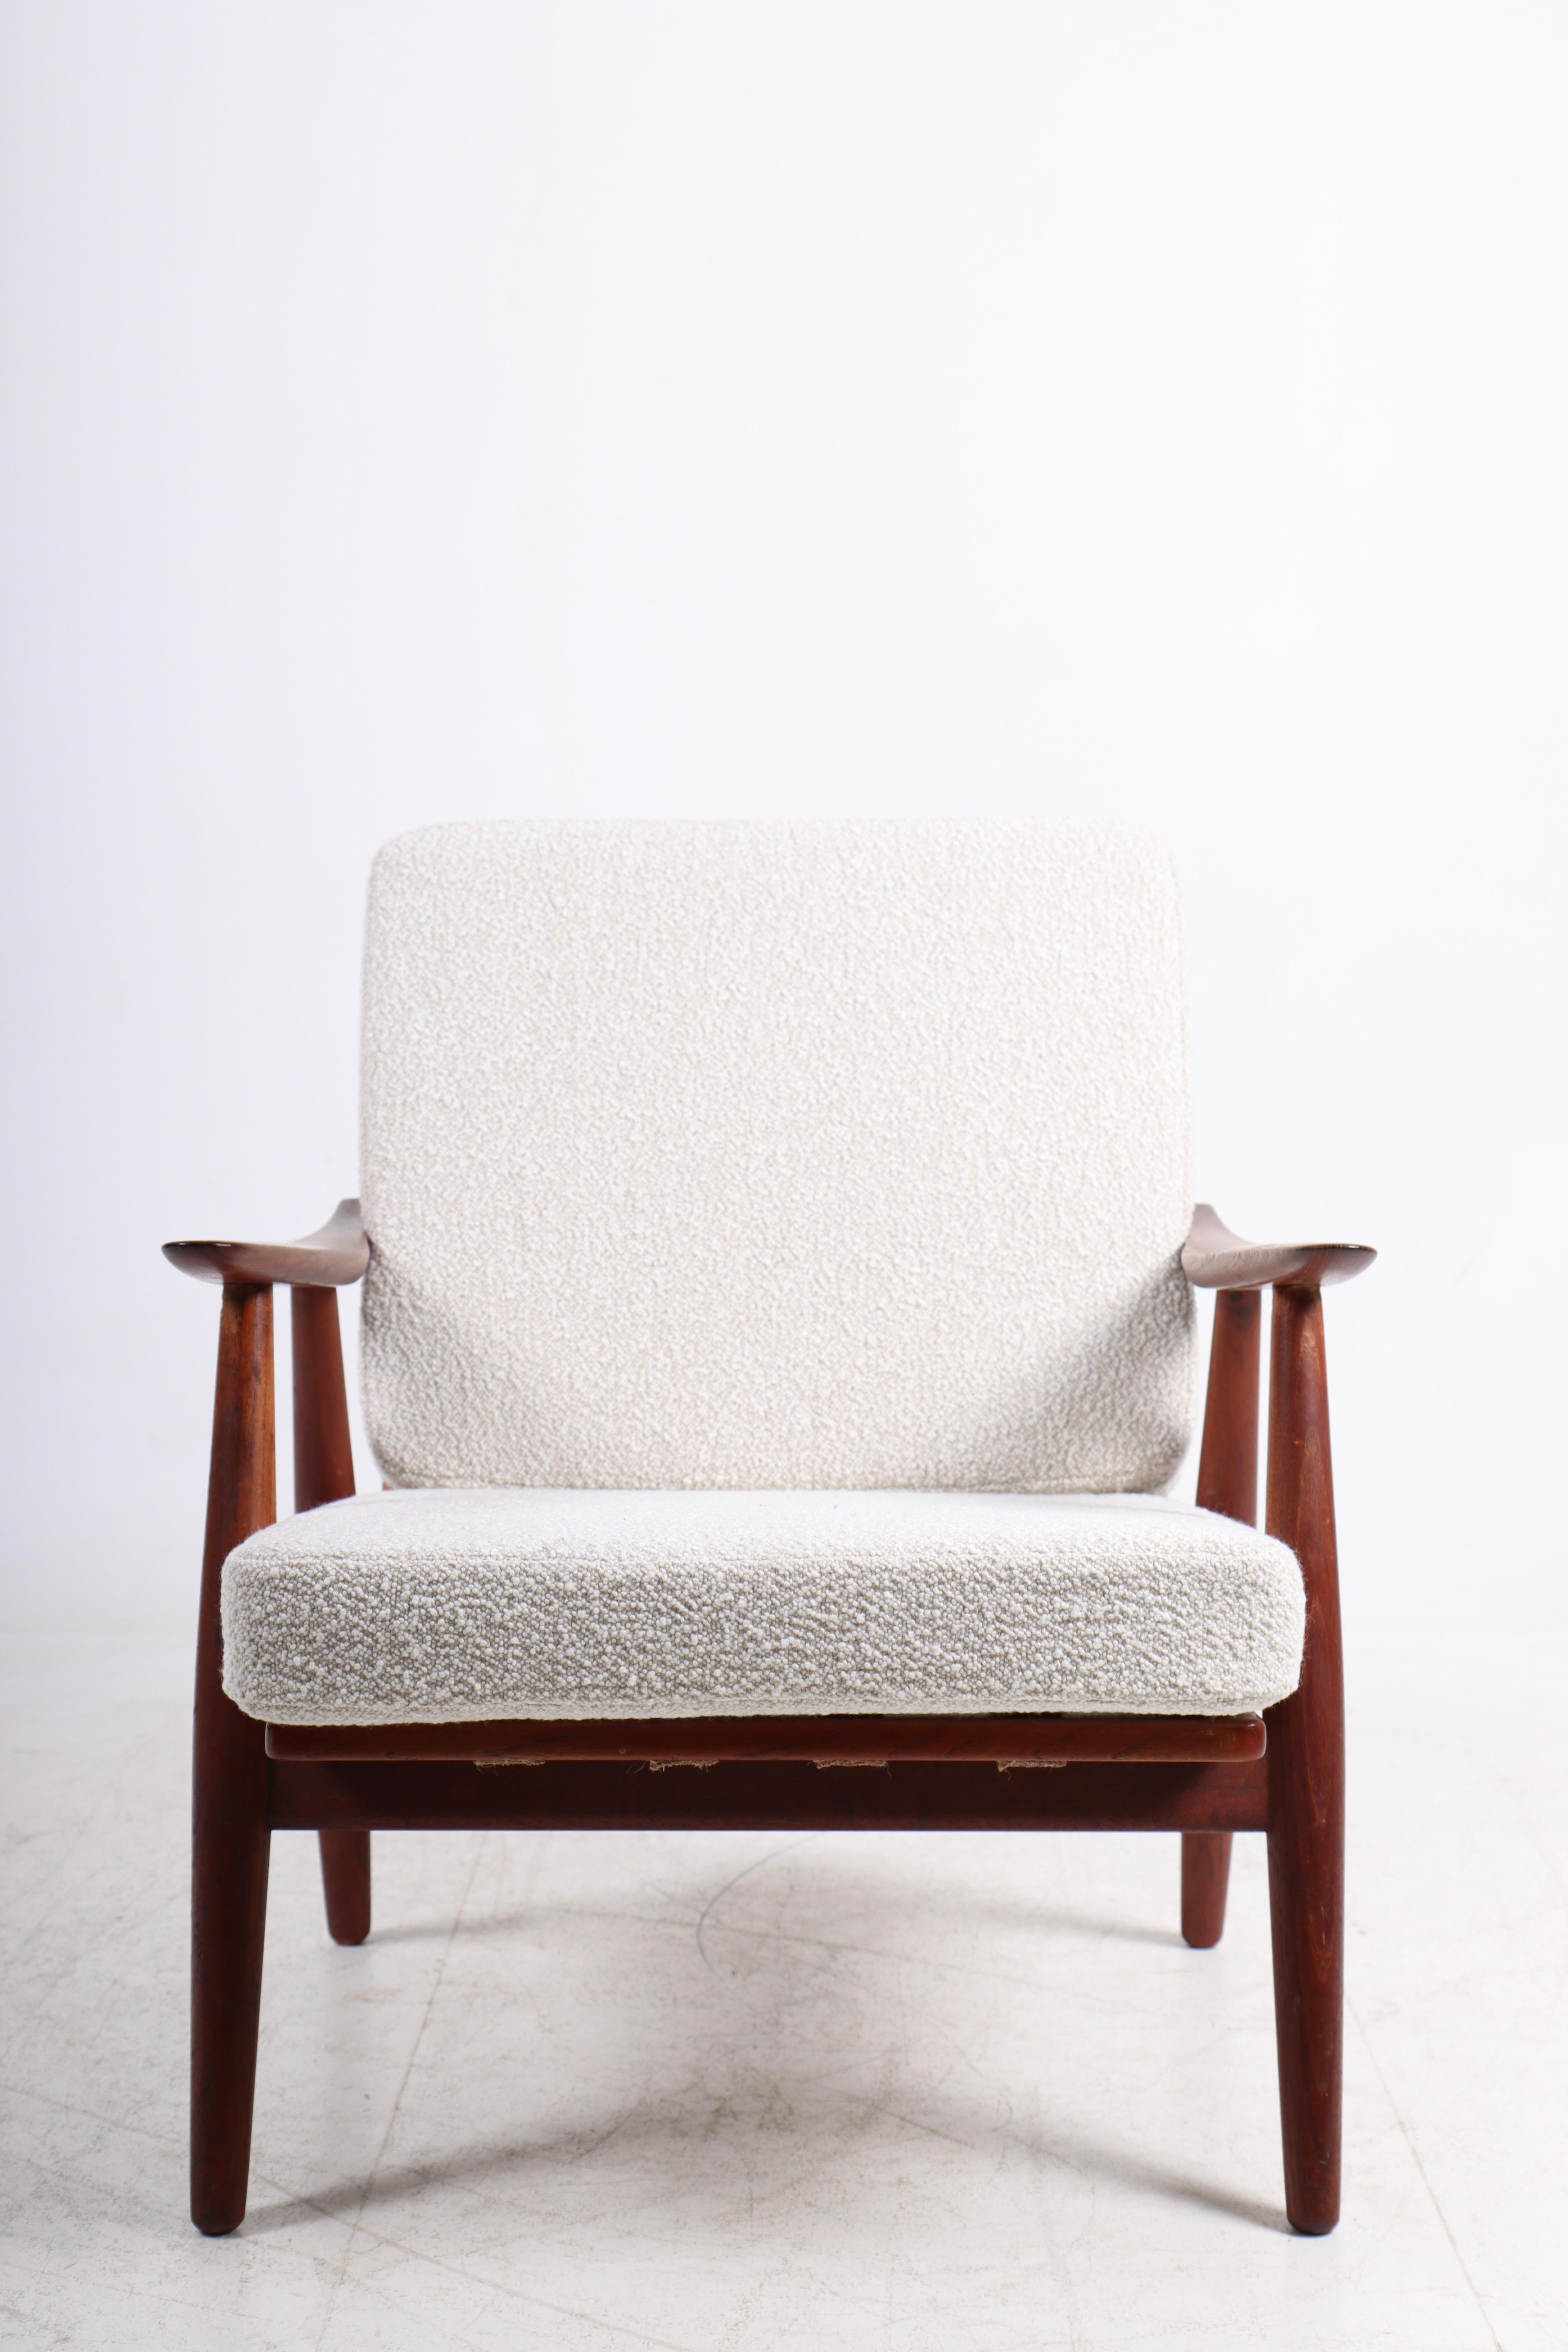 Easy chair GE270 - teak frame with cane and upholstered with New boucle fabric - Designed by Maa. Hans J Wegner - Edited by GETAMA - Danish 1950s
Great condition.